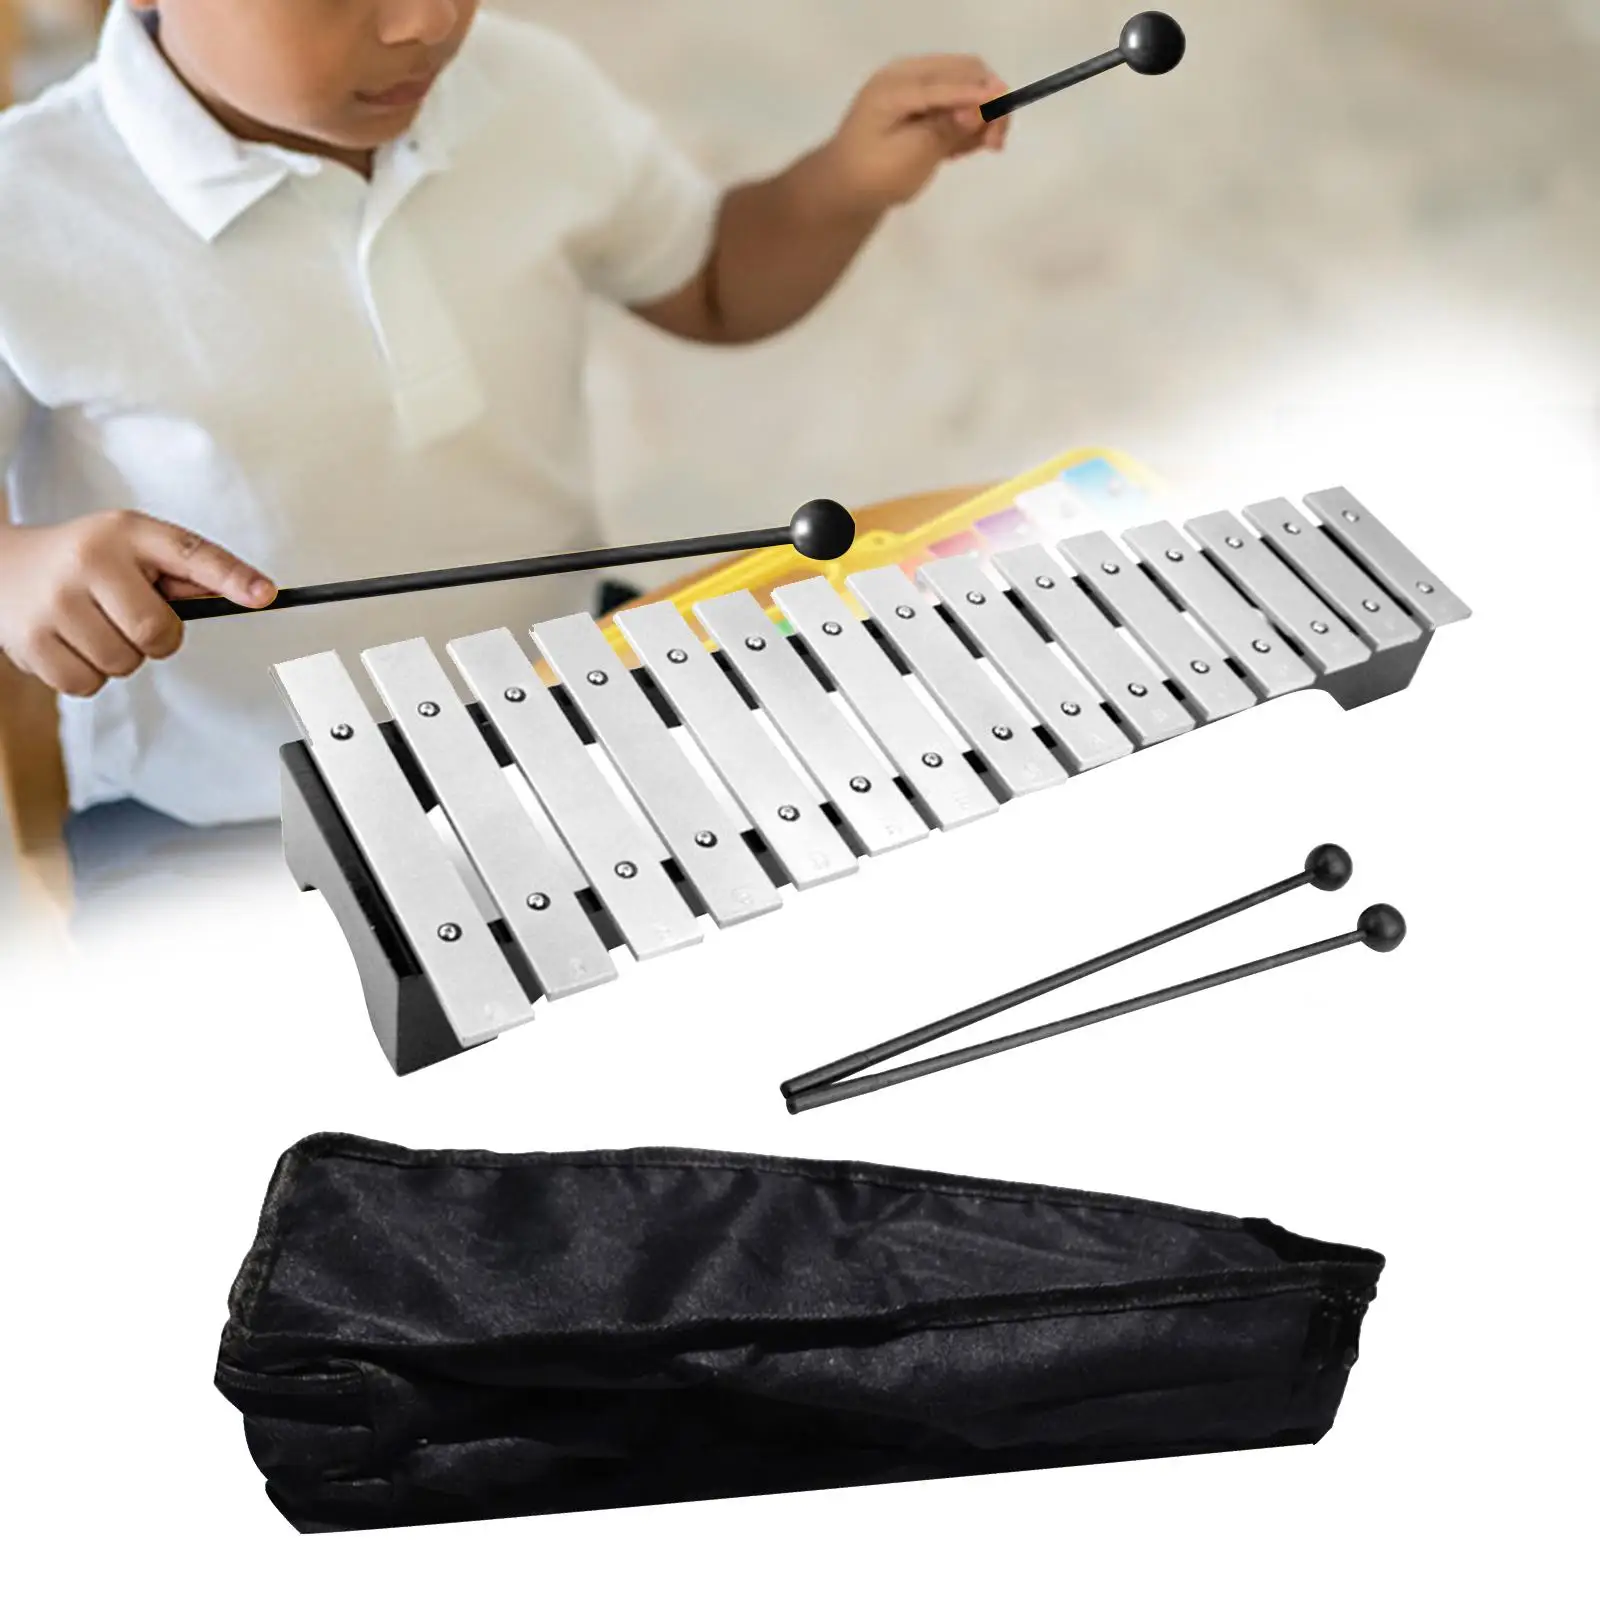 Professional 15 Note Glockenspiel Portable Percussion Xylophone Music Instrument Toy Percussion for Kids and Adult Beginner